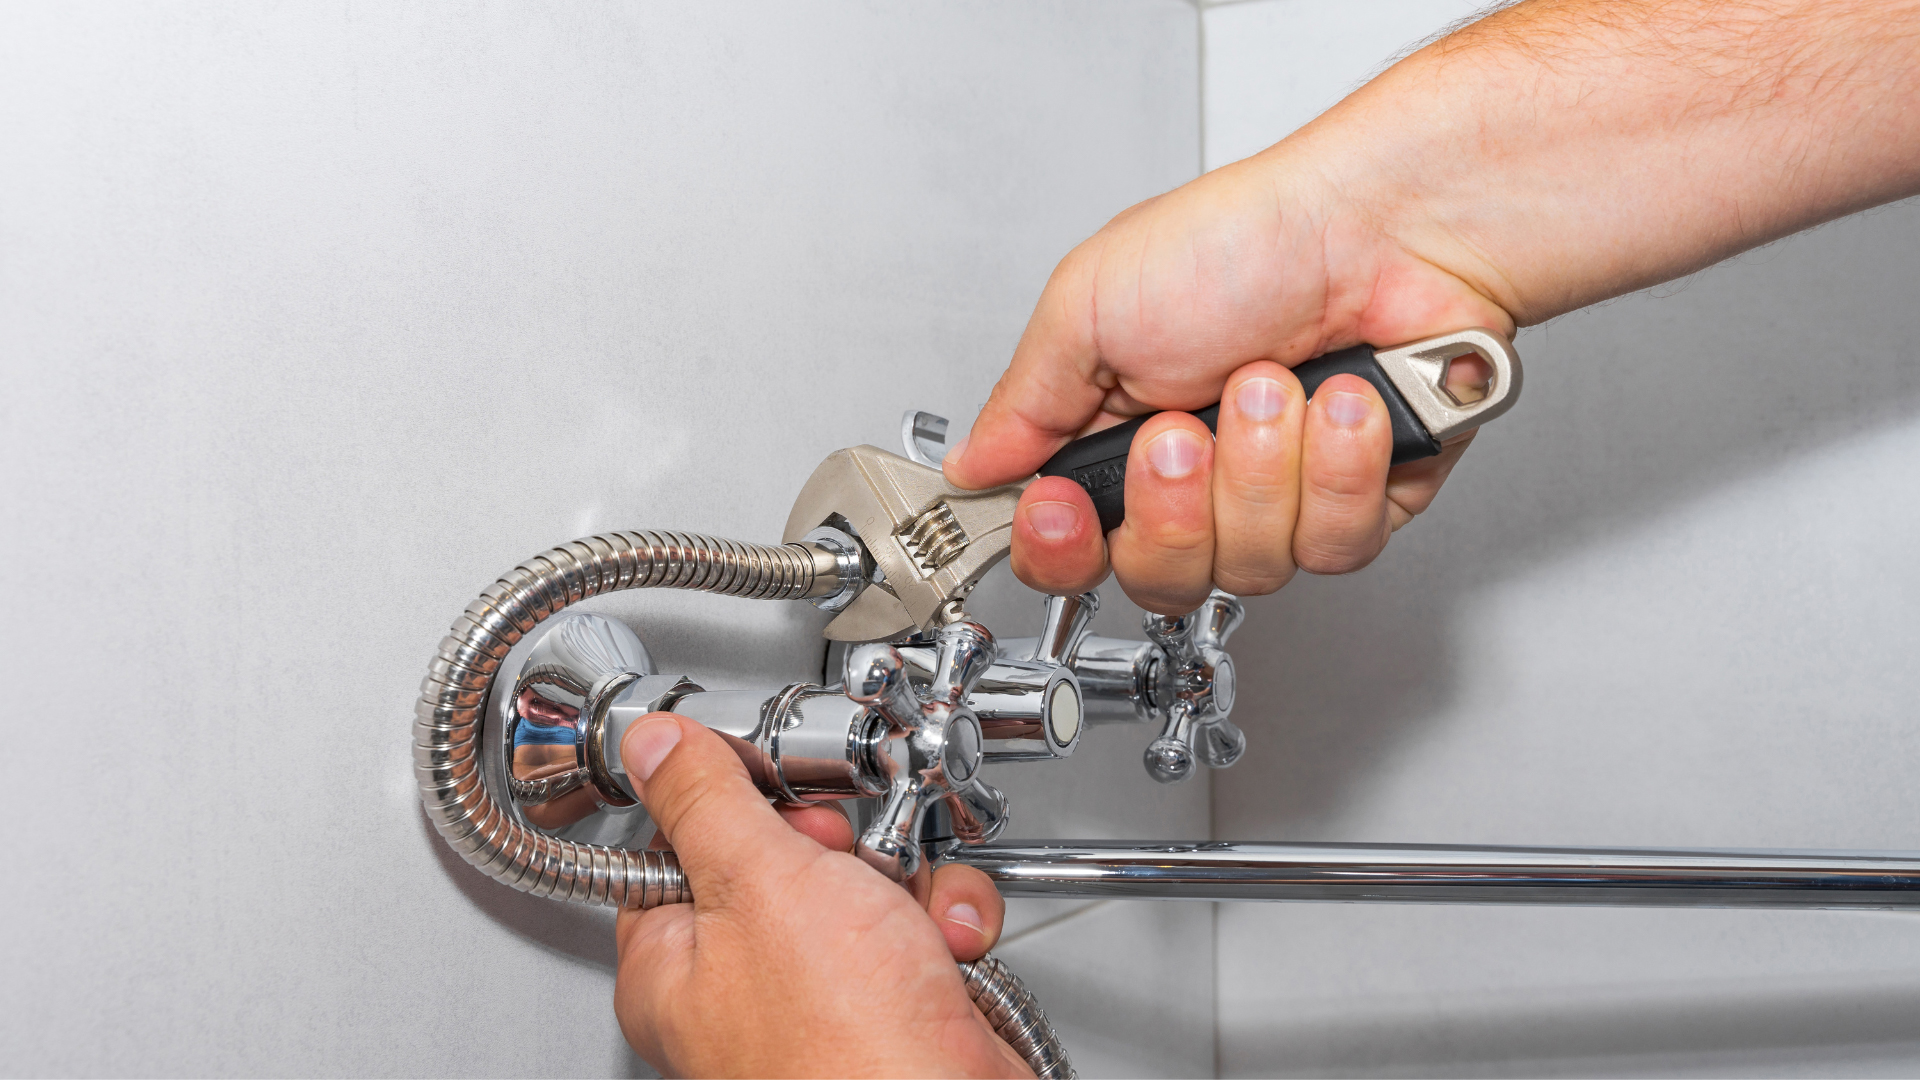 Tub & Shower Repair in Charleston, SC from Fix-it 24/7 Air Conditioning, Plumbing & Heating